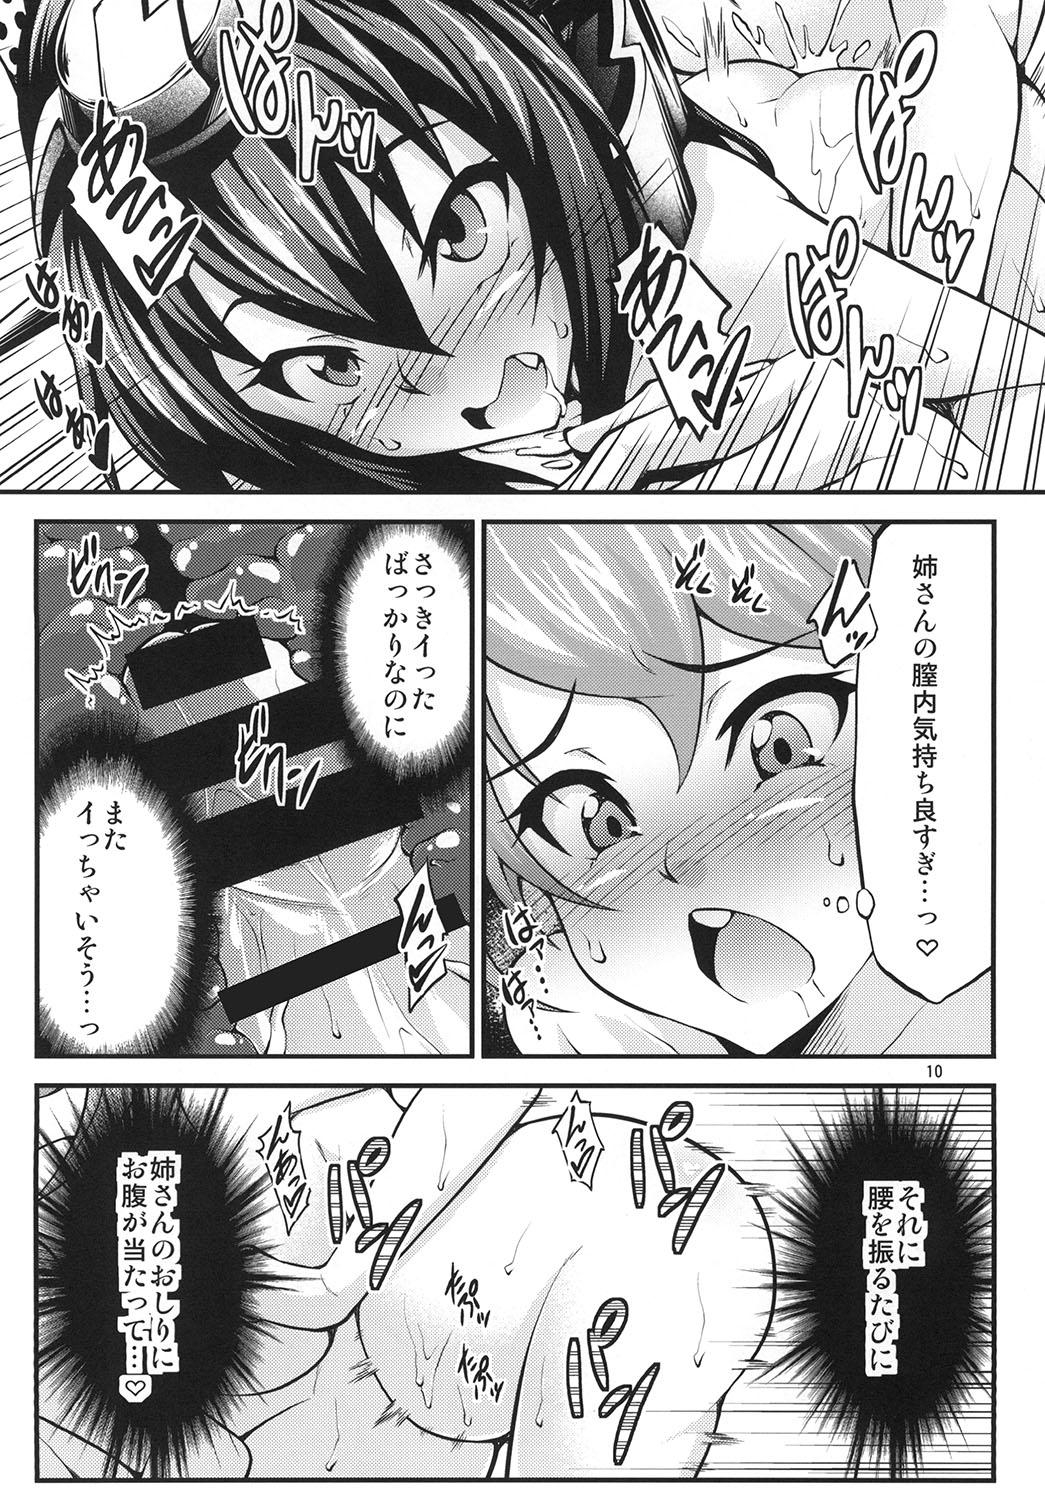 Soloboy Futabote! Big 7 - Kantai collection New - Page 10